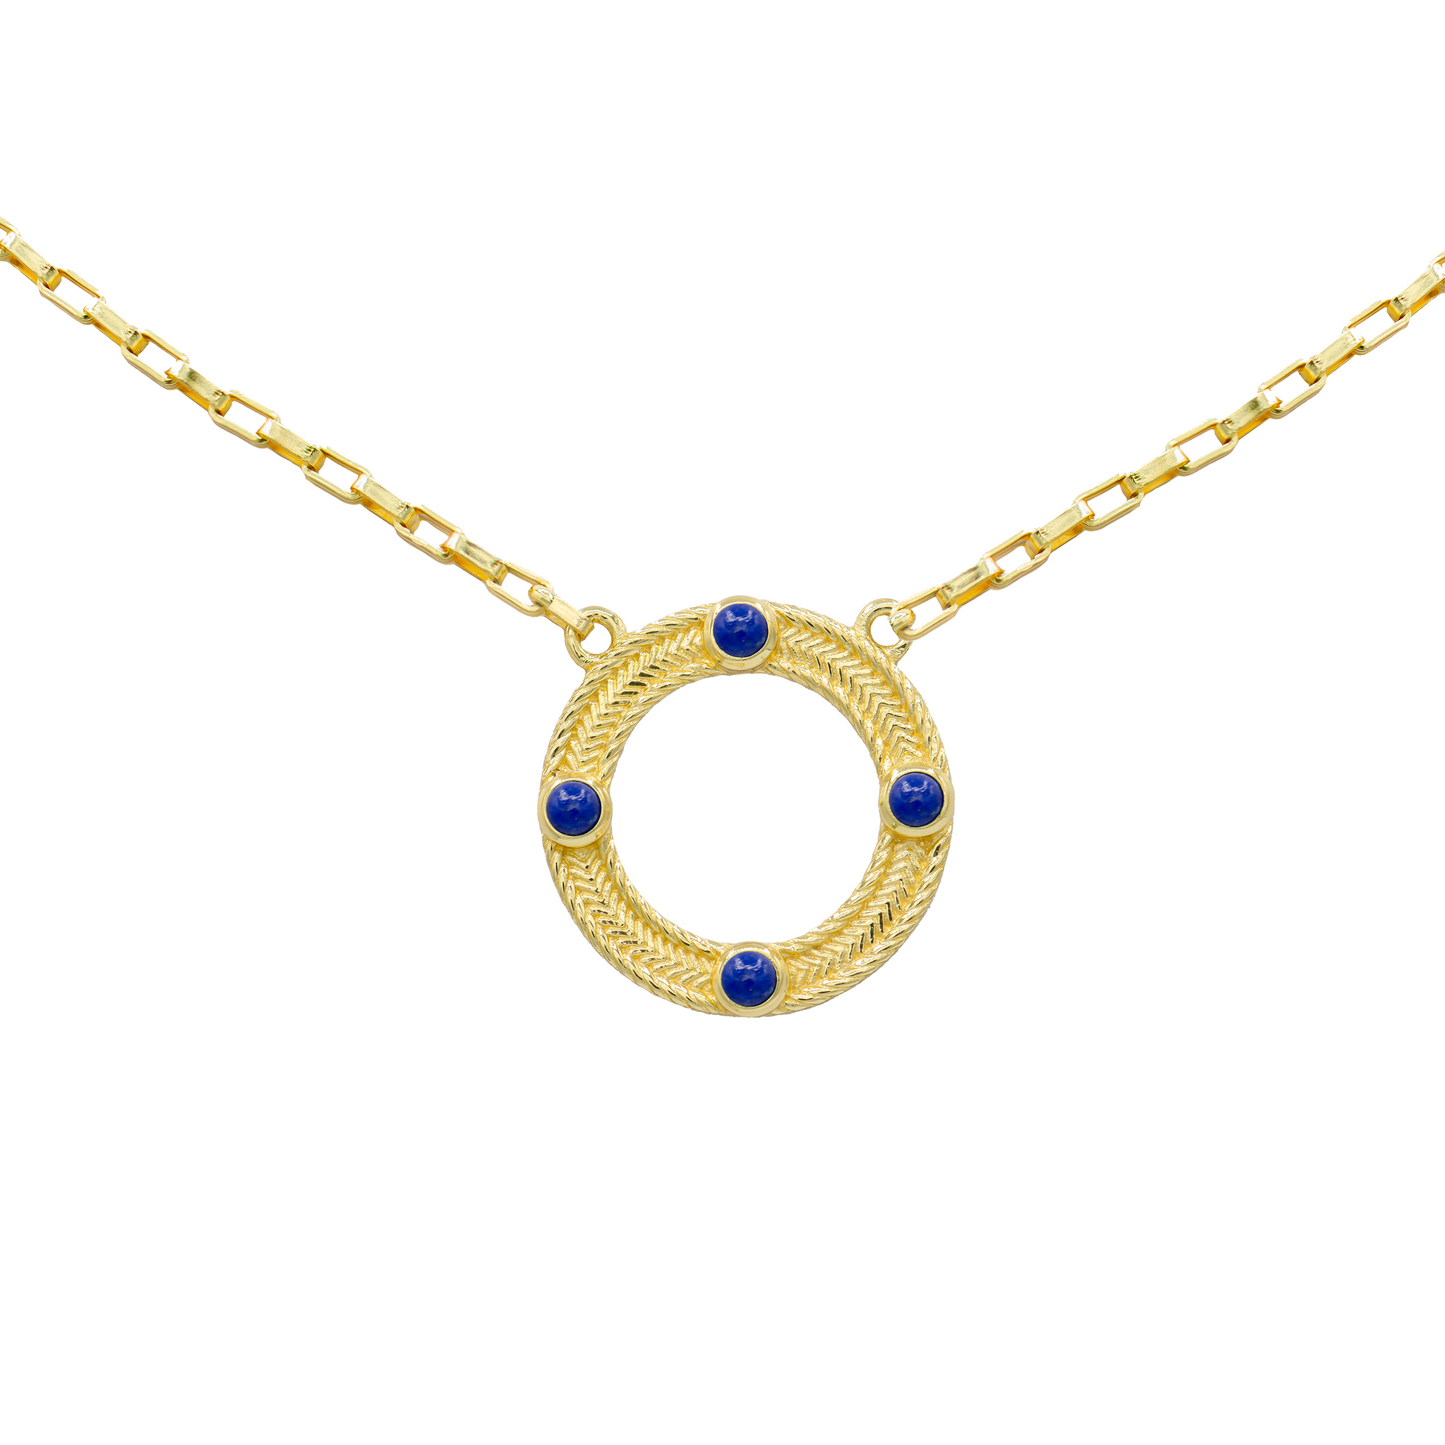 Aspen Open Circle Necklace with Gemstones